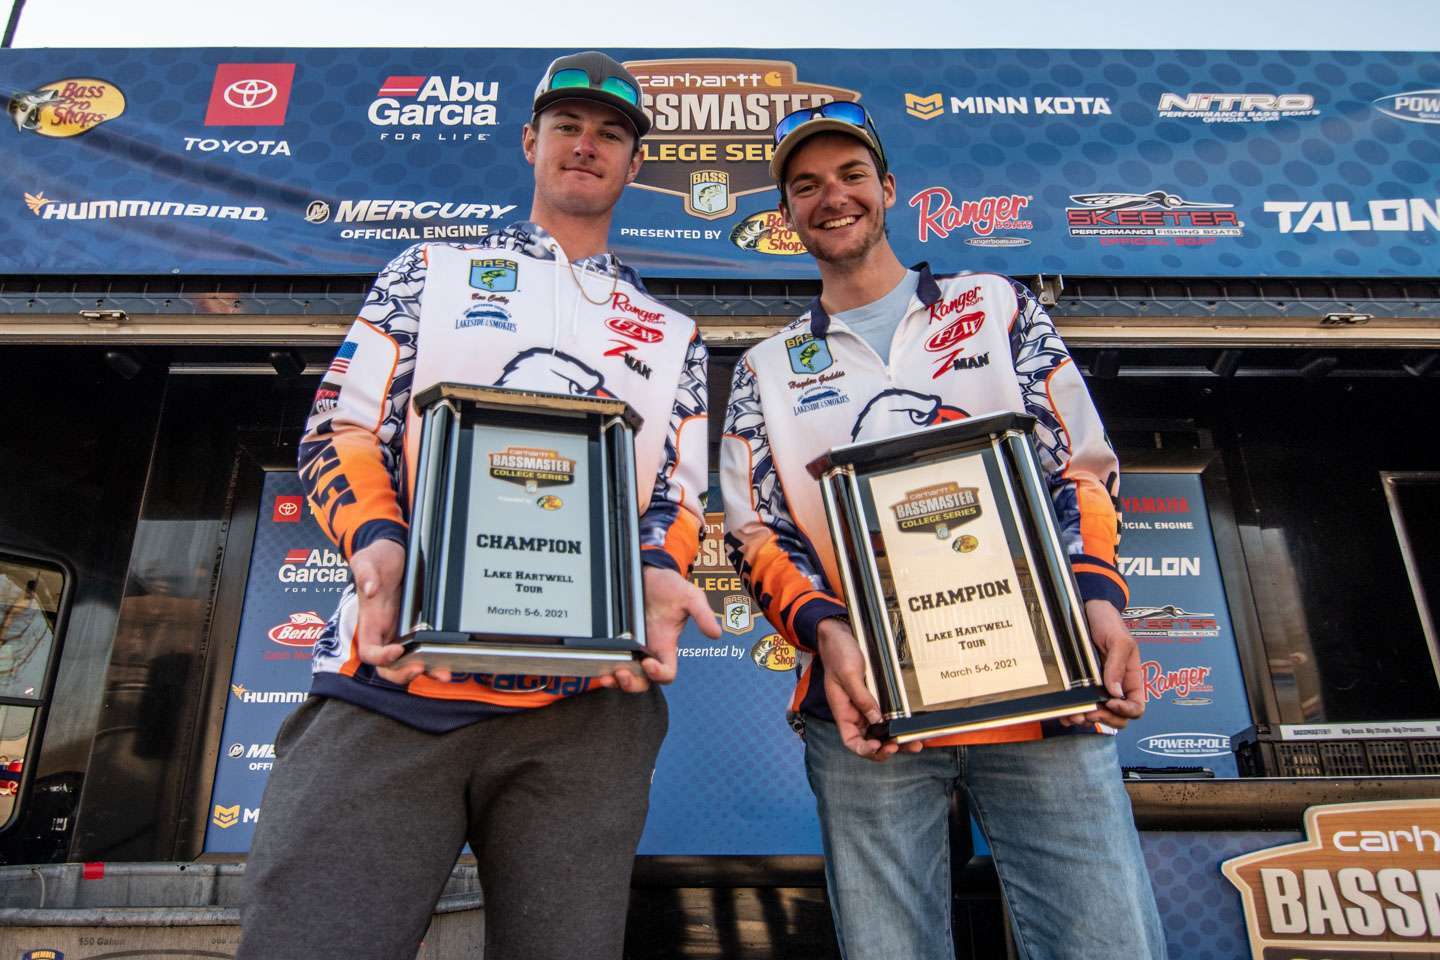 <b>Ben Cully - Hayden Gaddis, Carson-Newman University</b><br>  After discussing this list with current college anglers, one thing was evident – the team of Ben Cully and Hayden Gaddis of Carson-Newman is one of the most respected in the country. Cully and Gaddis took home a win at the first stop of the 2021 season at Lake Hartwell and registered two more Top 12 finishes in 2021. The talented duo finished fifth in the 2021 Team of the Year standings. 